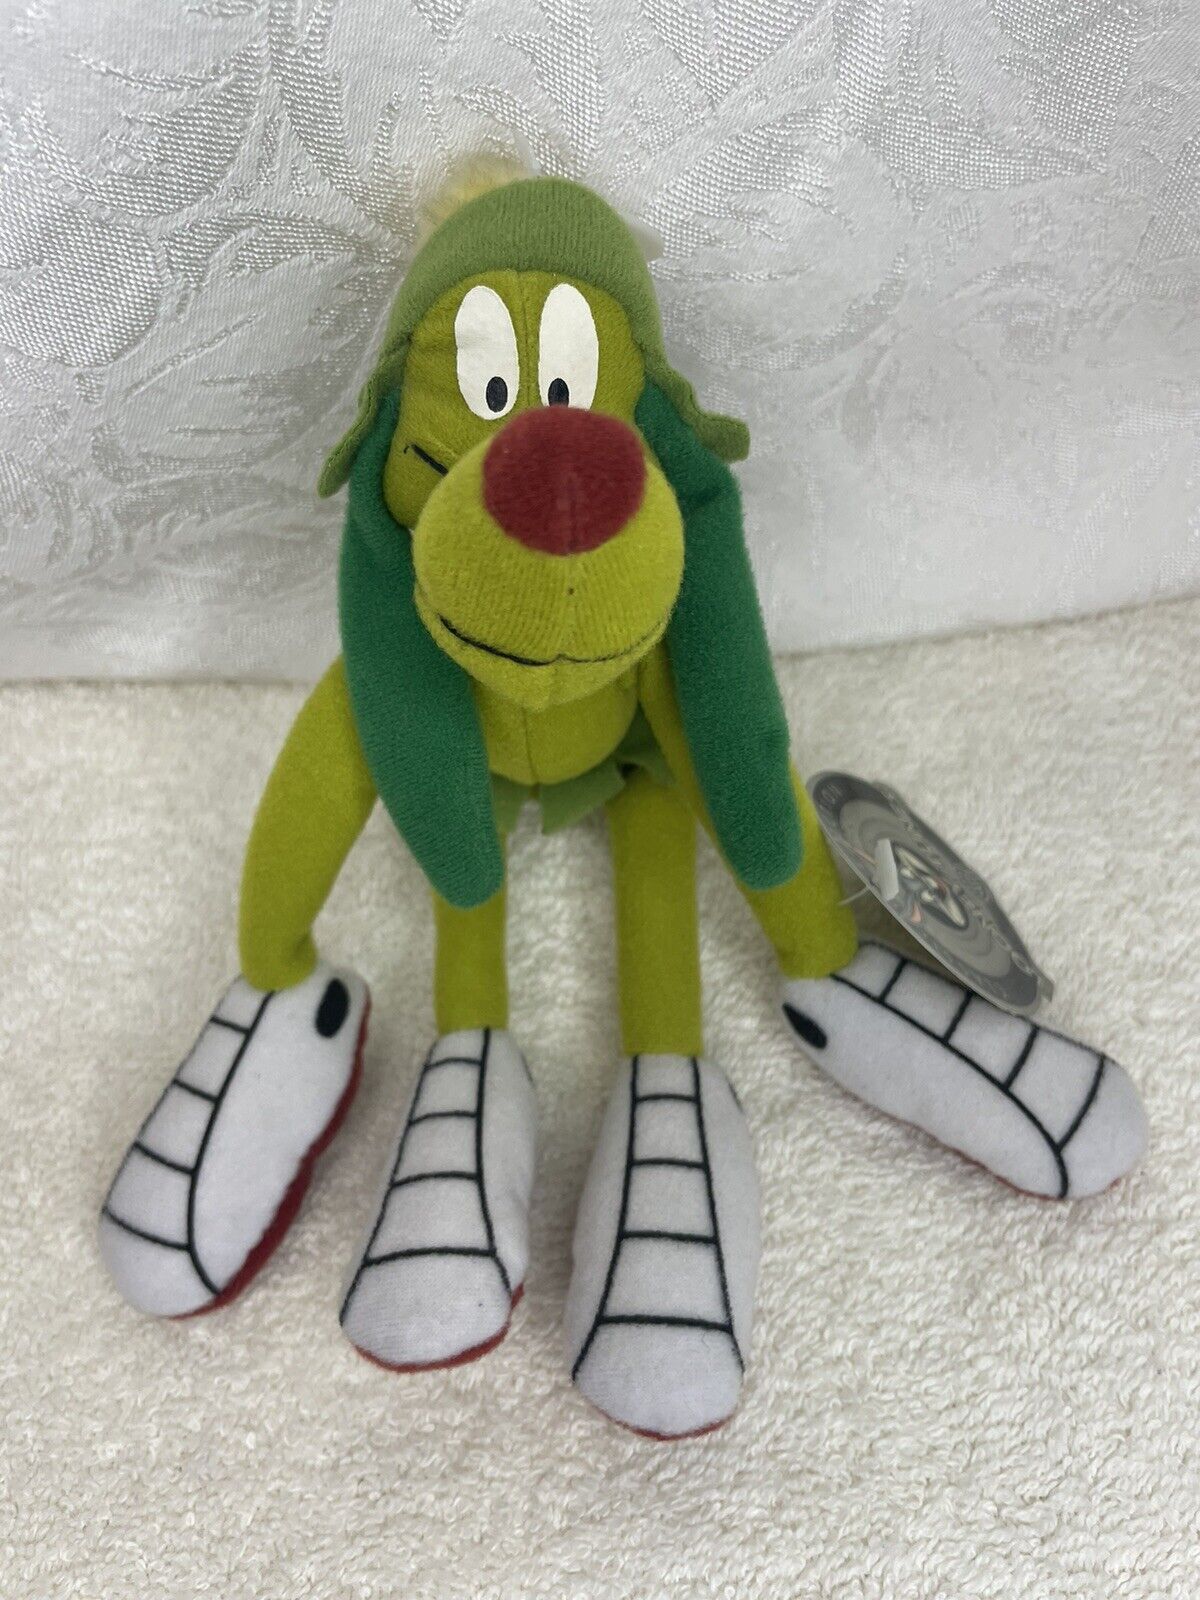 Vintage Applause Looney Tunes K9 Marvin The Martian Dog 5” Plush Toy  1999 New